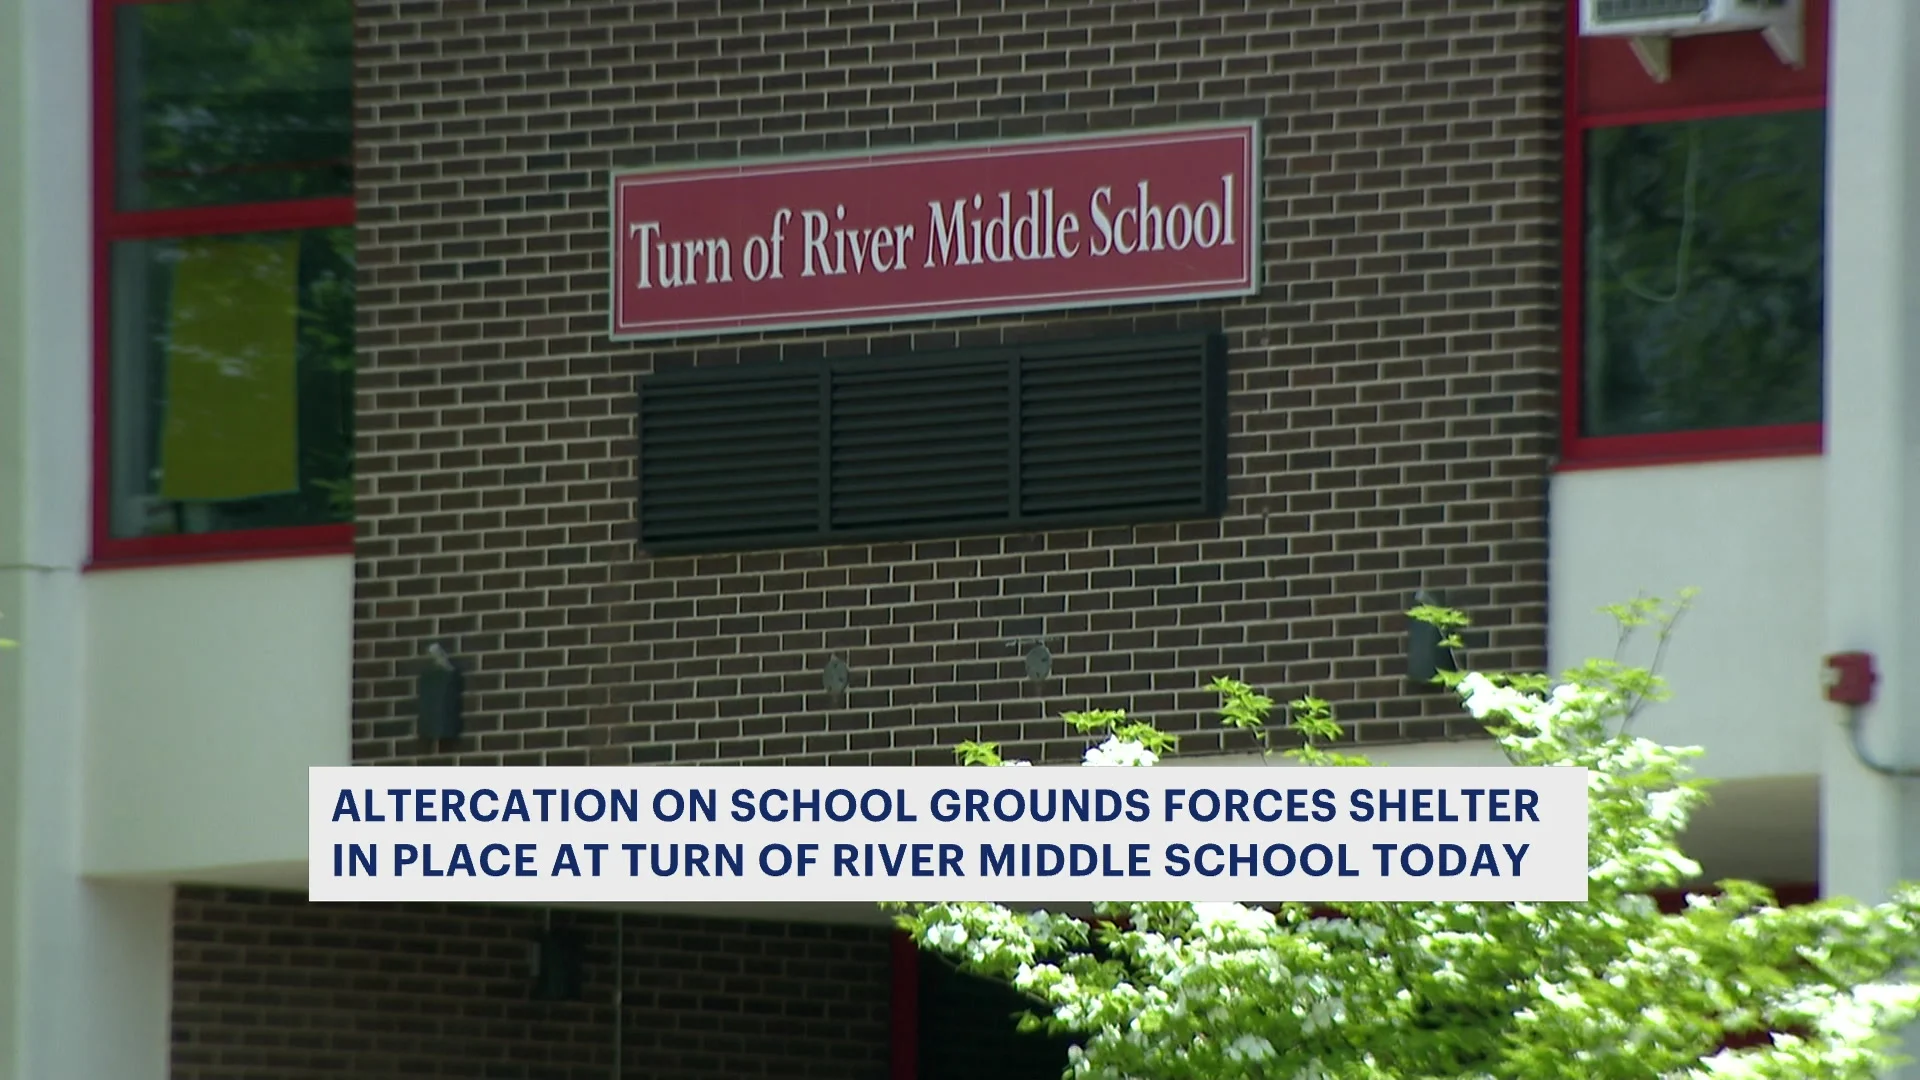 Stamford officials: Turn of River Middle School briefly placed in a shelter-in-place over altercation